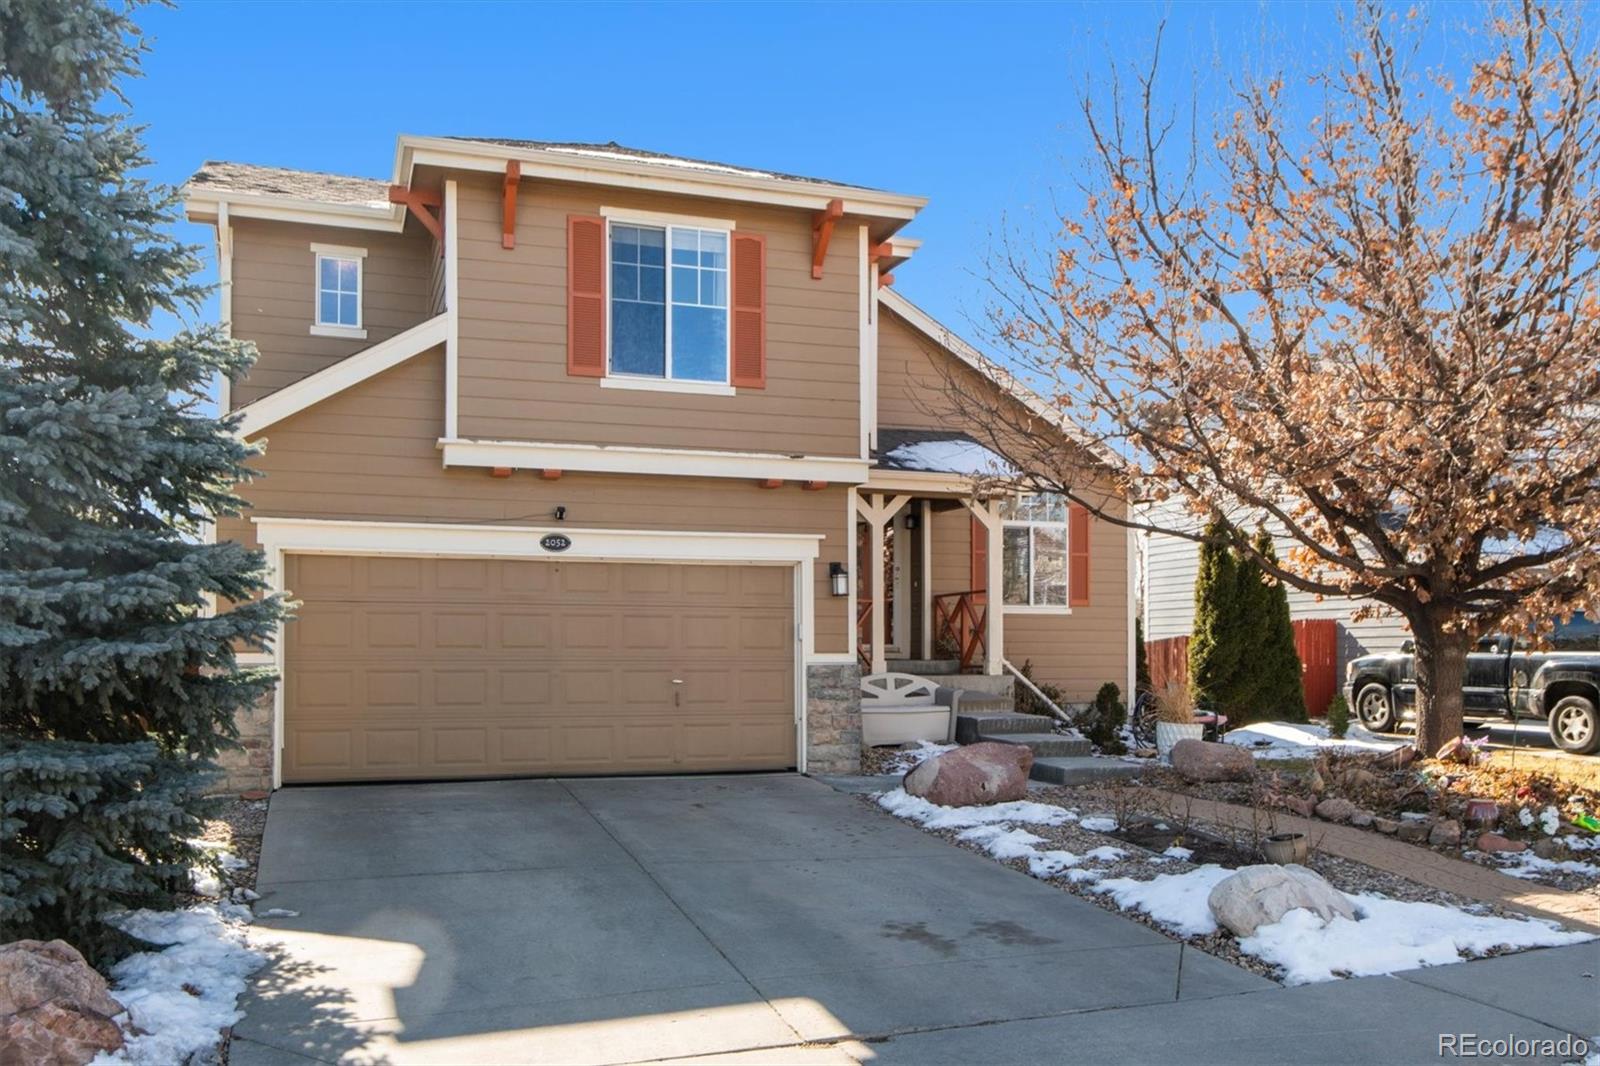 2052 E 98th Place, thornton MLS: 8762983 Beds: 3 Baths: 3 Price: $550,000